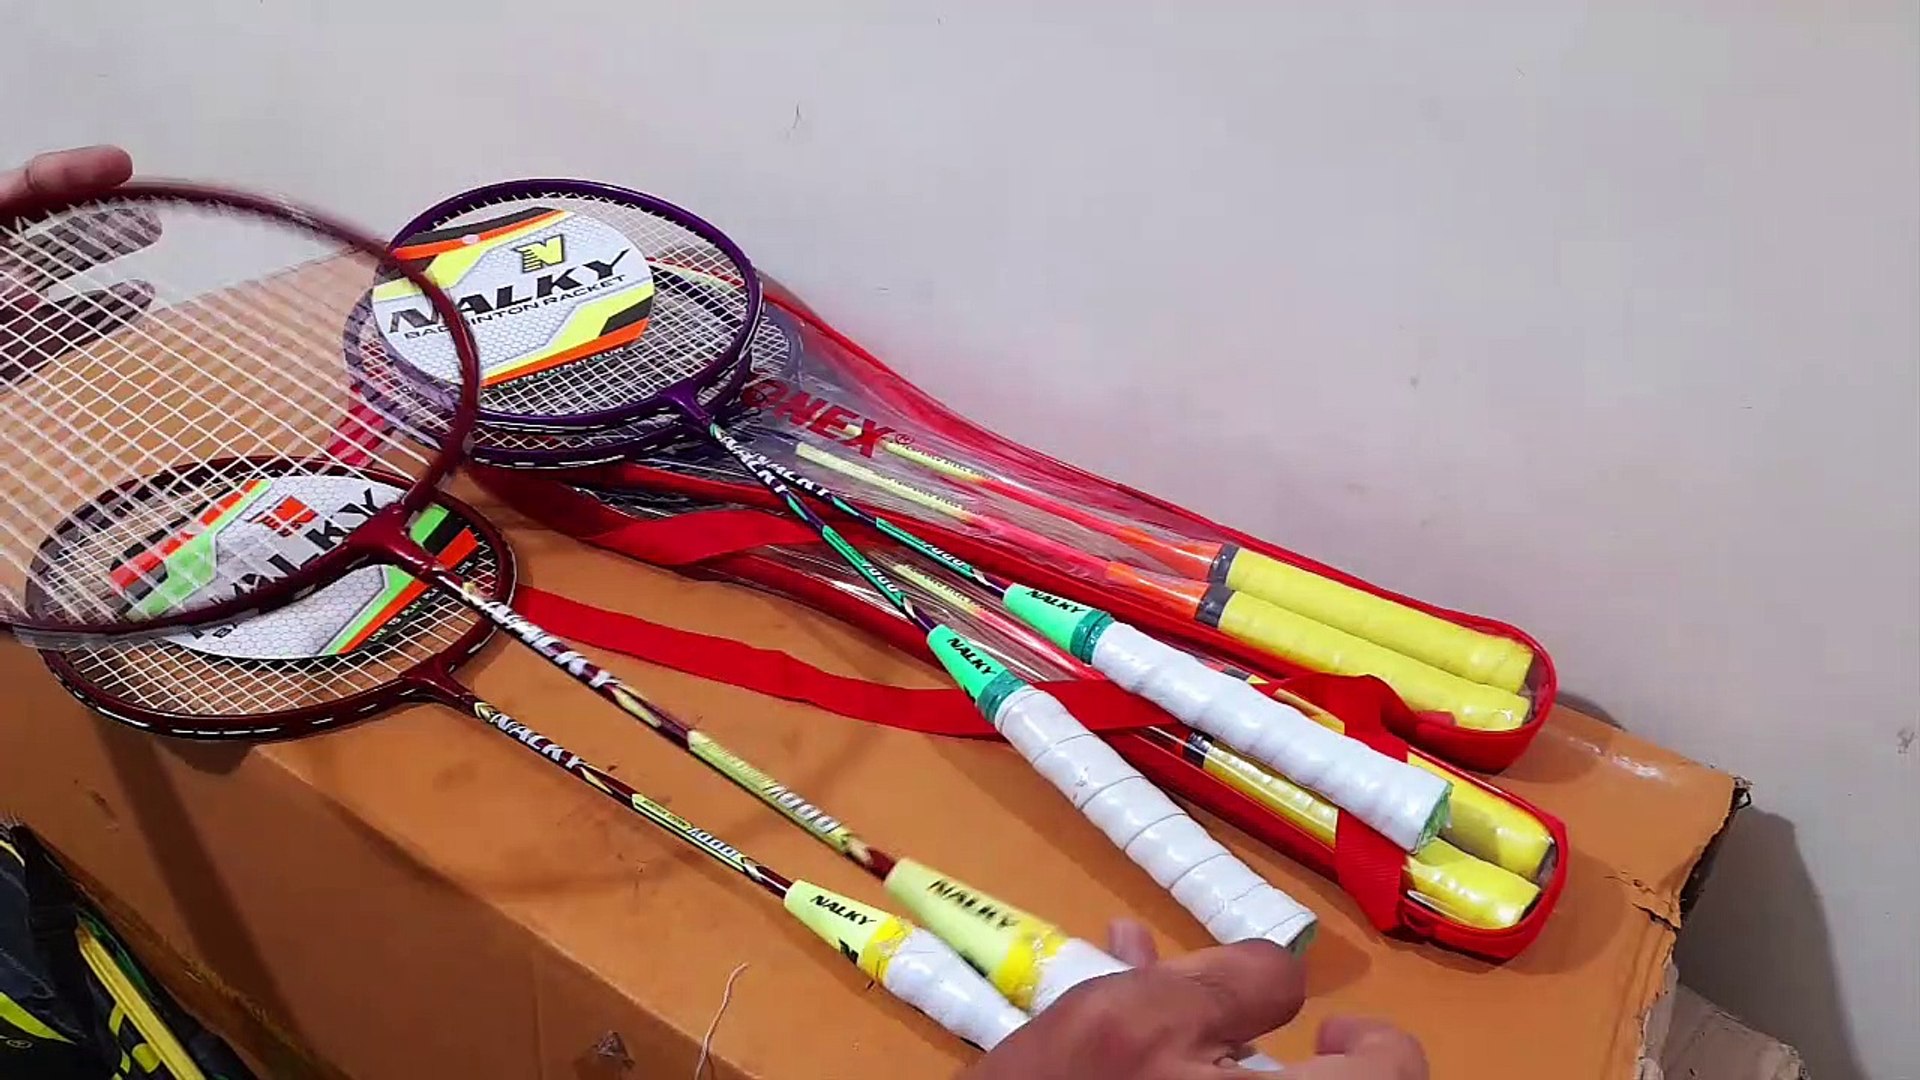 Unboxing and Review of jonex nalky badminton racket for summer vacation fun 